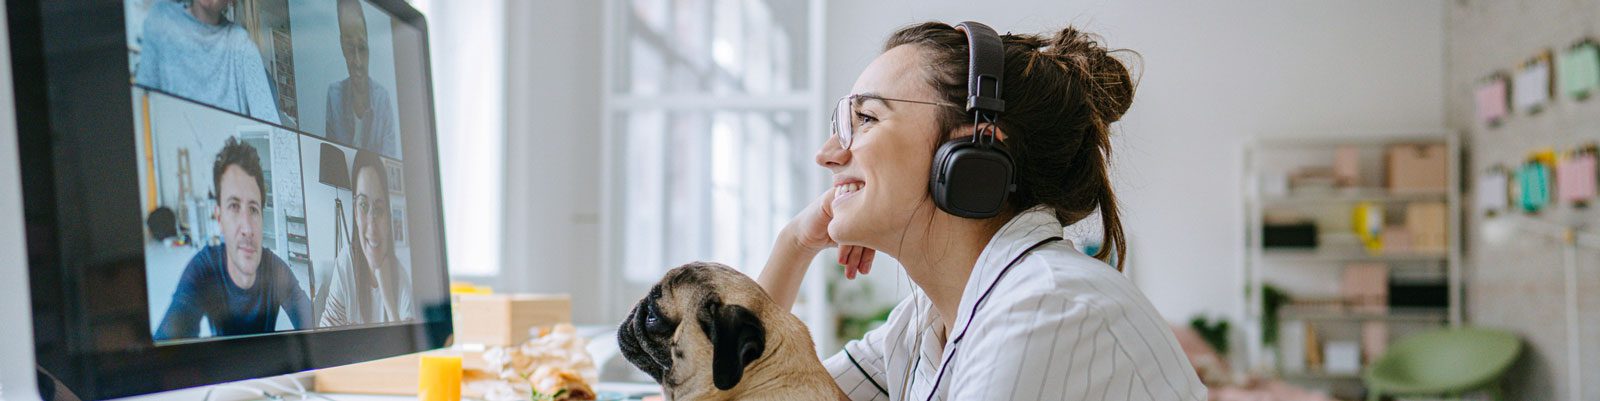 Woman wearing headphones and holding a pug talks to colleagues in a video conference from an office setting